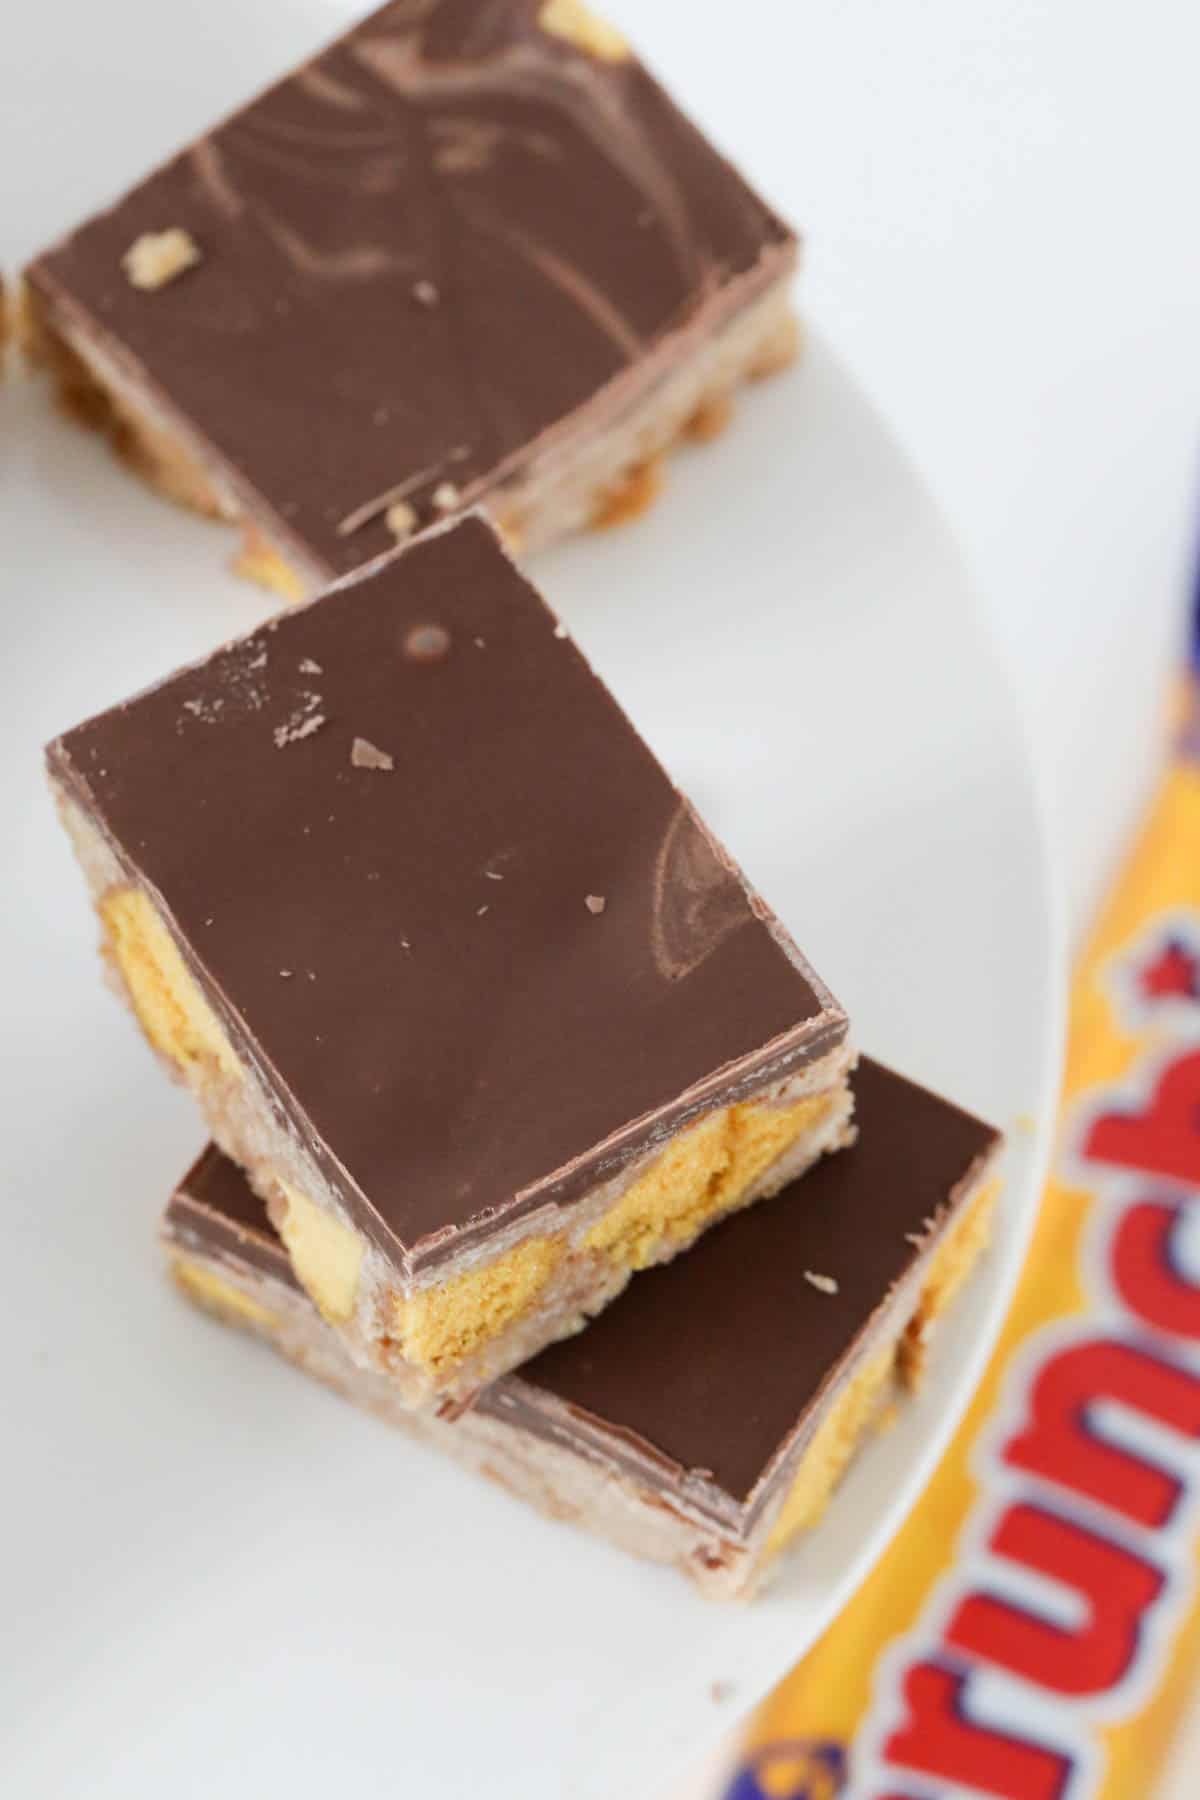 An overhead shot of squares of a chocolate topped slice filled with chunks of Crunchie bars.